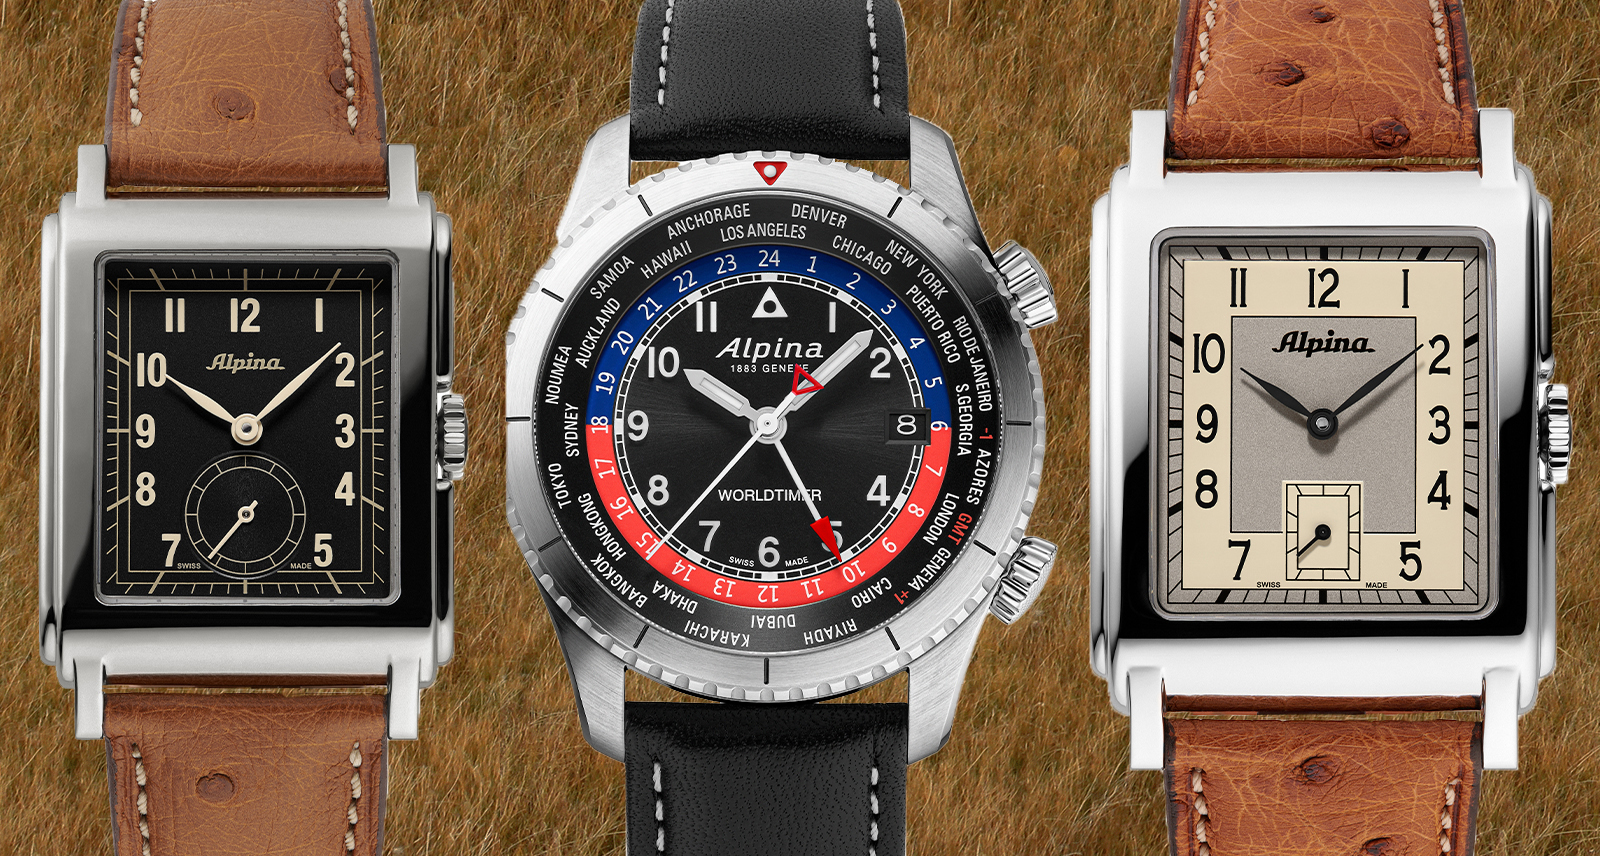 Alpina three watches laid out over grass background